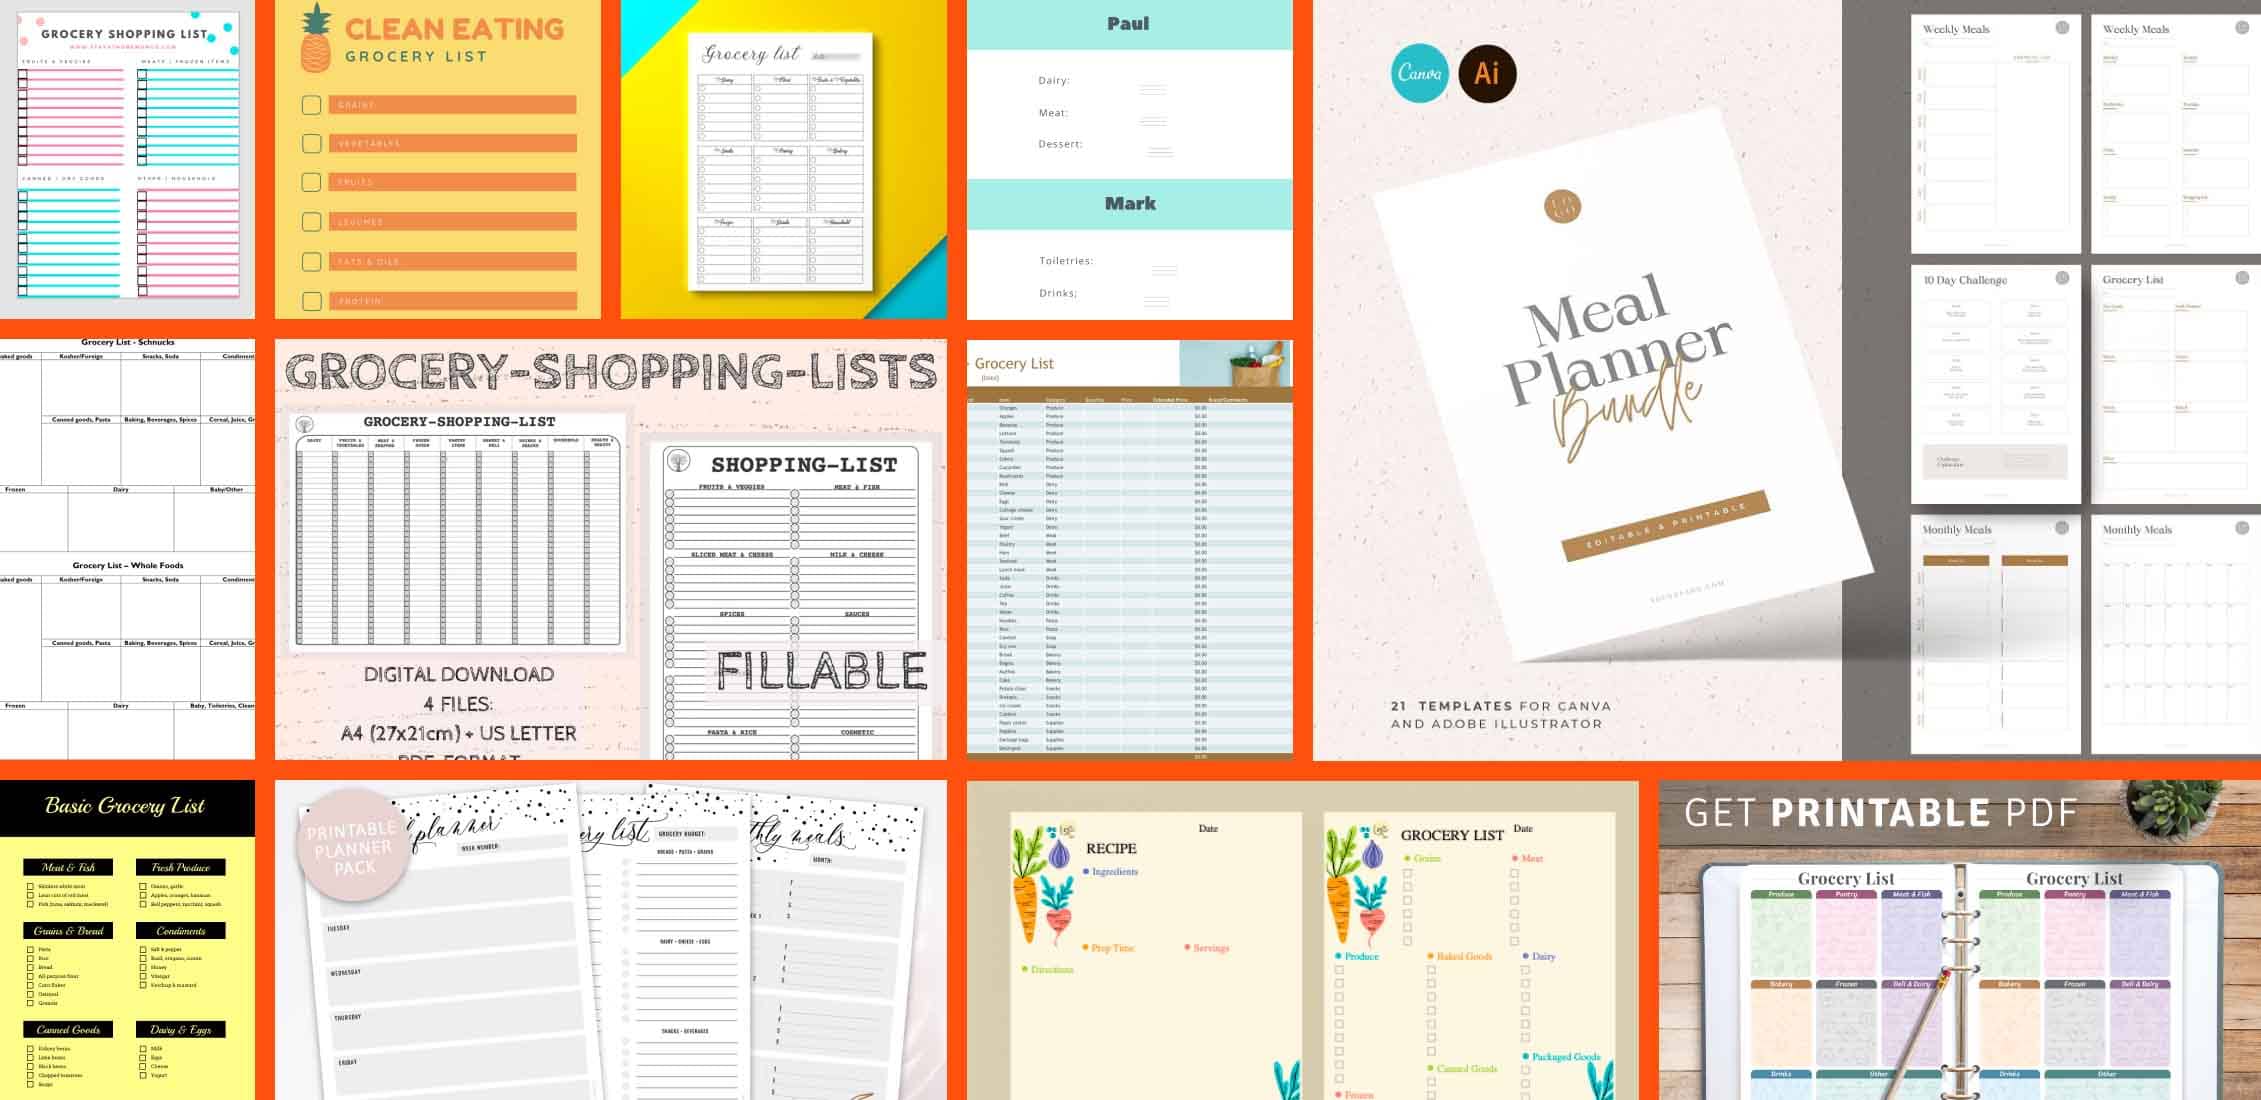 Best Grocery List Templates Example.